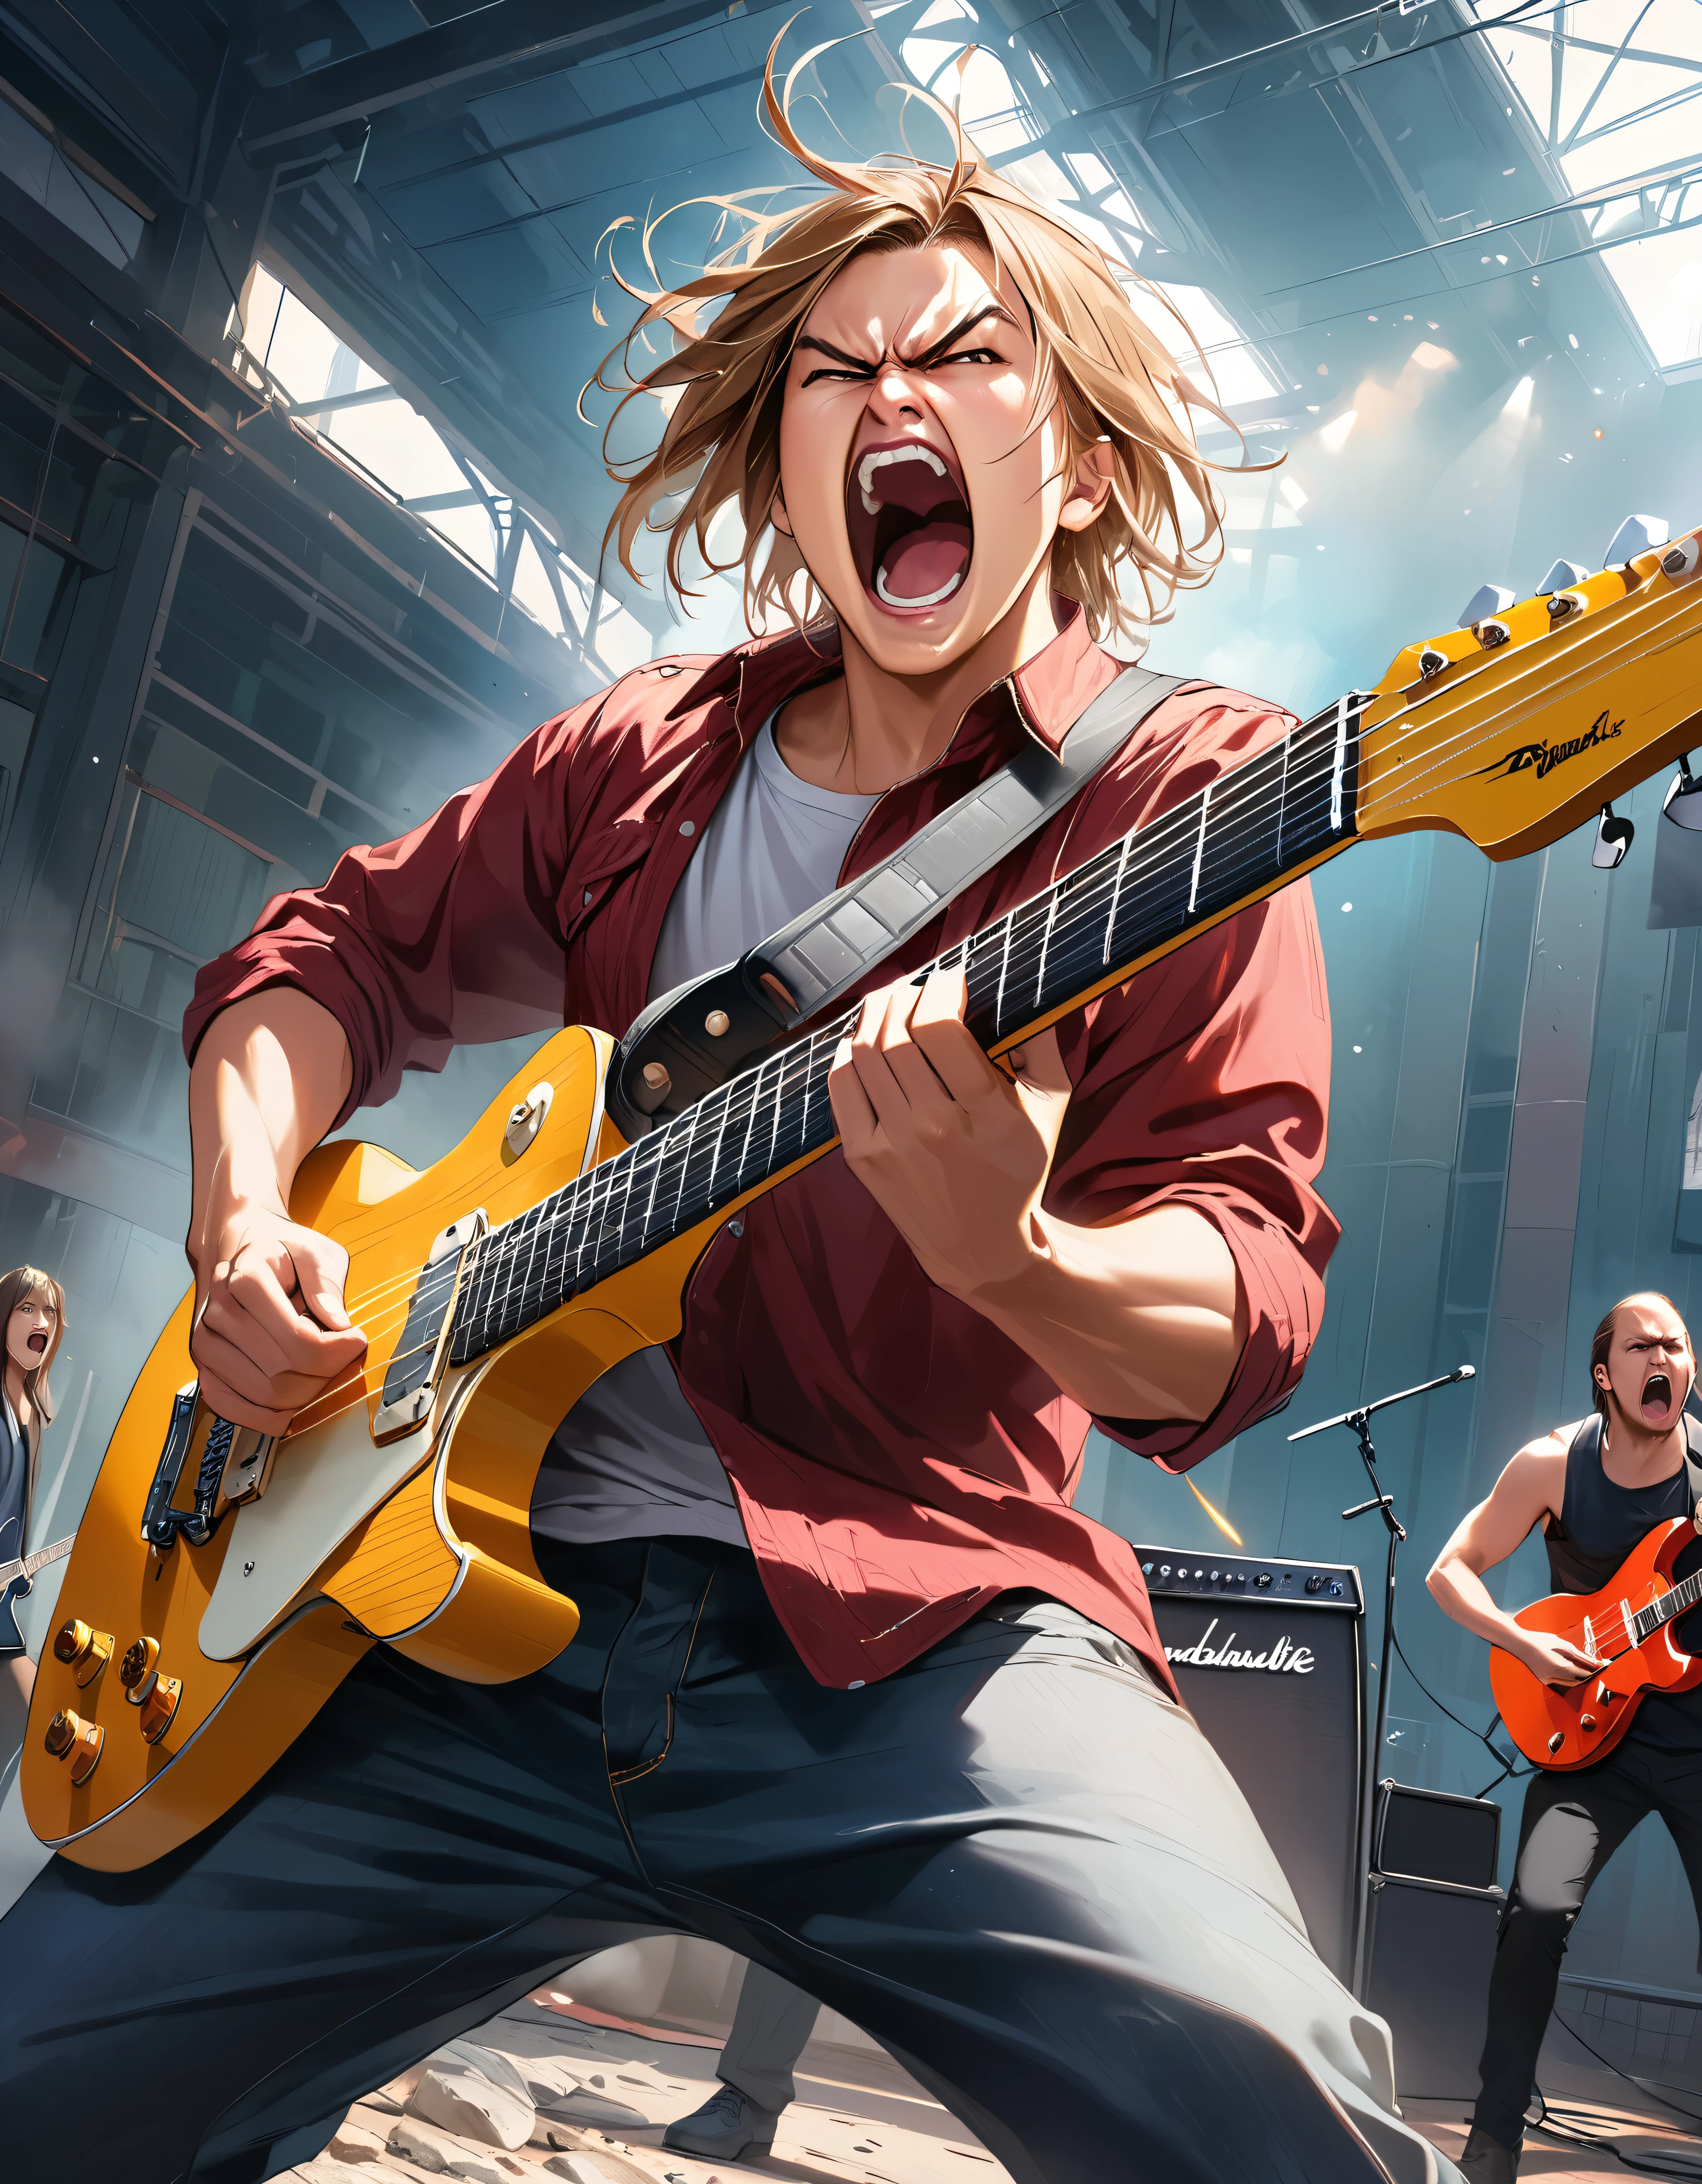 Realistic, CG illustration, Raw photoのような, Swinging an electric guitar, Rock, guitarist, Folding a guitar, Angry, An absurd life, rage, In this unreasonable world, indignant, Unfair reality, Scream and break your guitar, Rock &#39;n&#39; roll, Maximize your frustration with society, Realistic, Crazy, aesthetic, highest quality, Highest Resolution, Bold, delicate, Electric Punk, blacklight, holographic, Extremely vivid full color, Realistic photos, Raw photo, Irrational Anger,